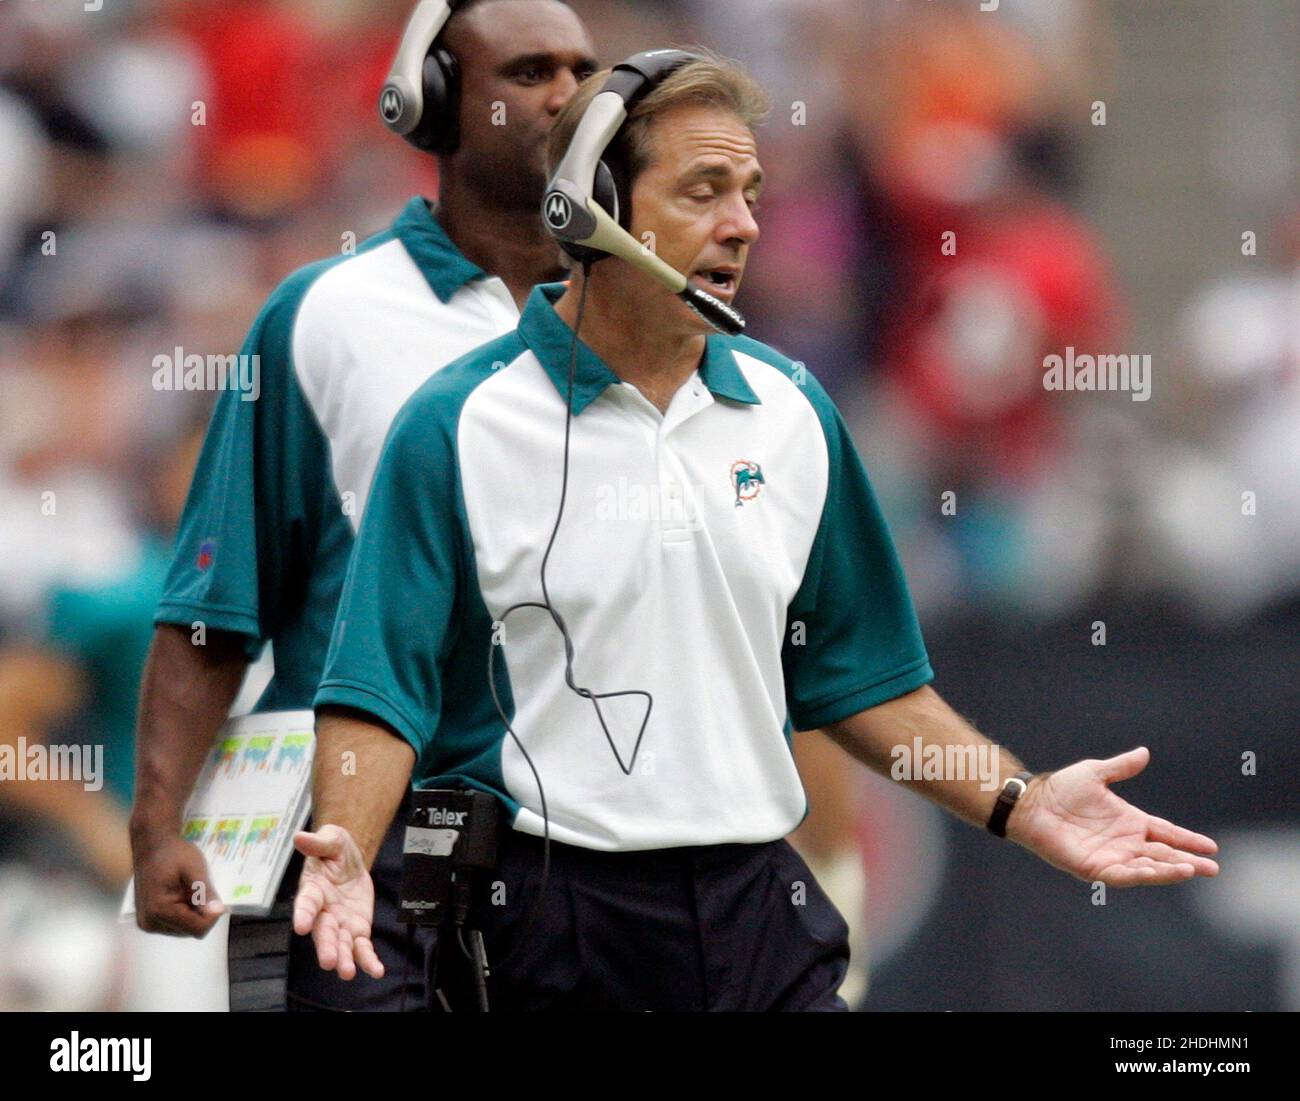 Miami Dolphins' Nick Saban is not happy at the end of the third quarter during their game against the Houston Texans at Reliant Stadium in Houston, Texas, Sunday, Oct. 1, 2006. The Texans defeated the Dolphins 17-15. (Photo by Joe Rimkus Jr./Miami Herald/TNS/Sipa USA) Credit: Sipa USA/Alamy Live News Stock Photo